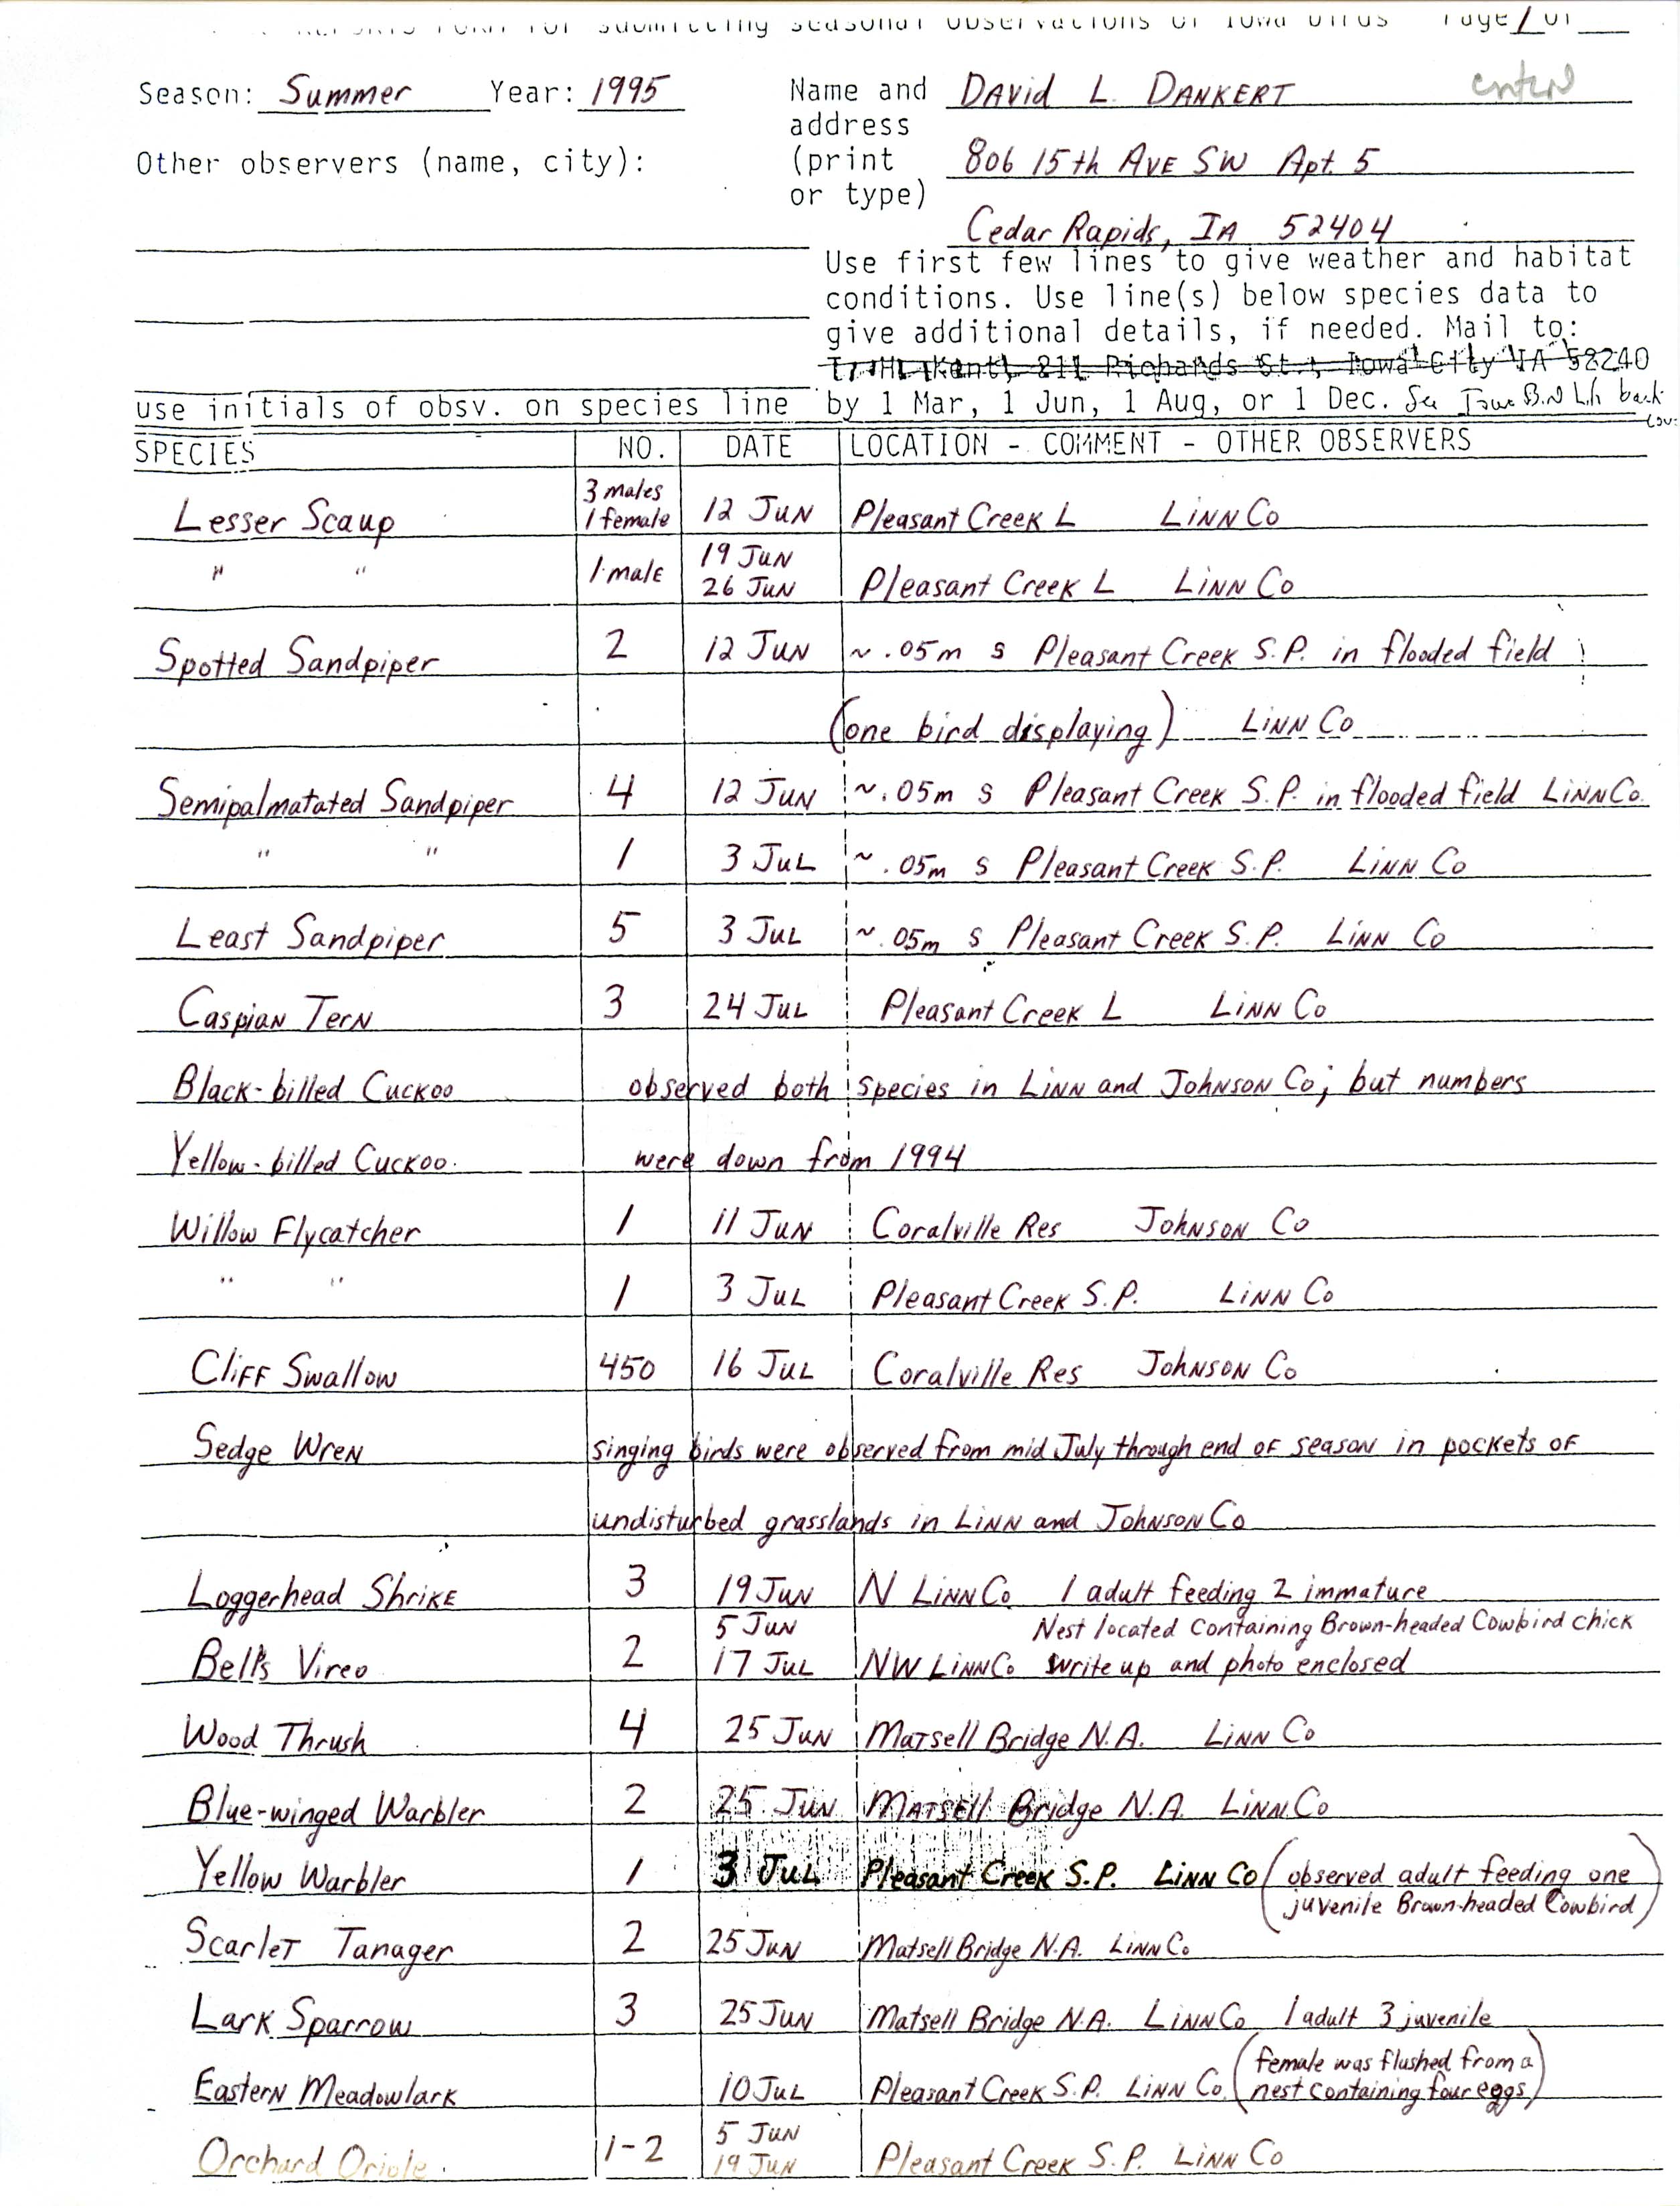 Field reports form for submitting seasonal observations of Iowa birds, summer 1995, David Dankert